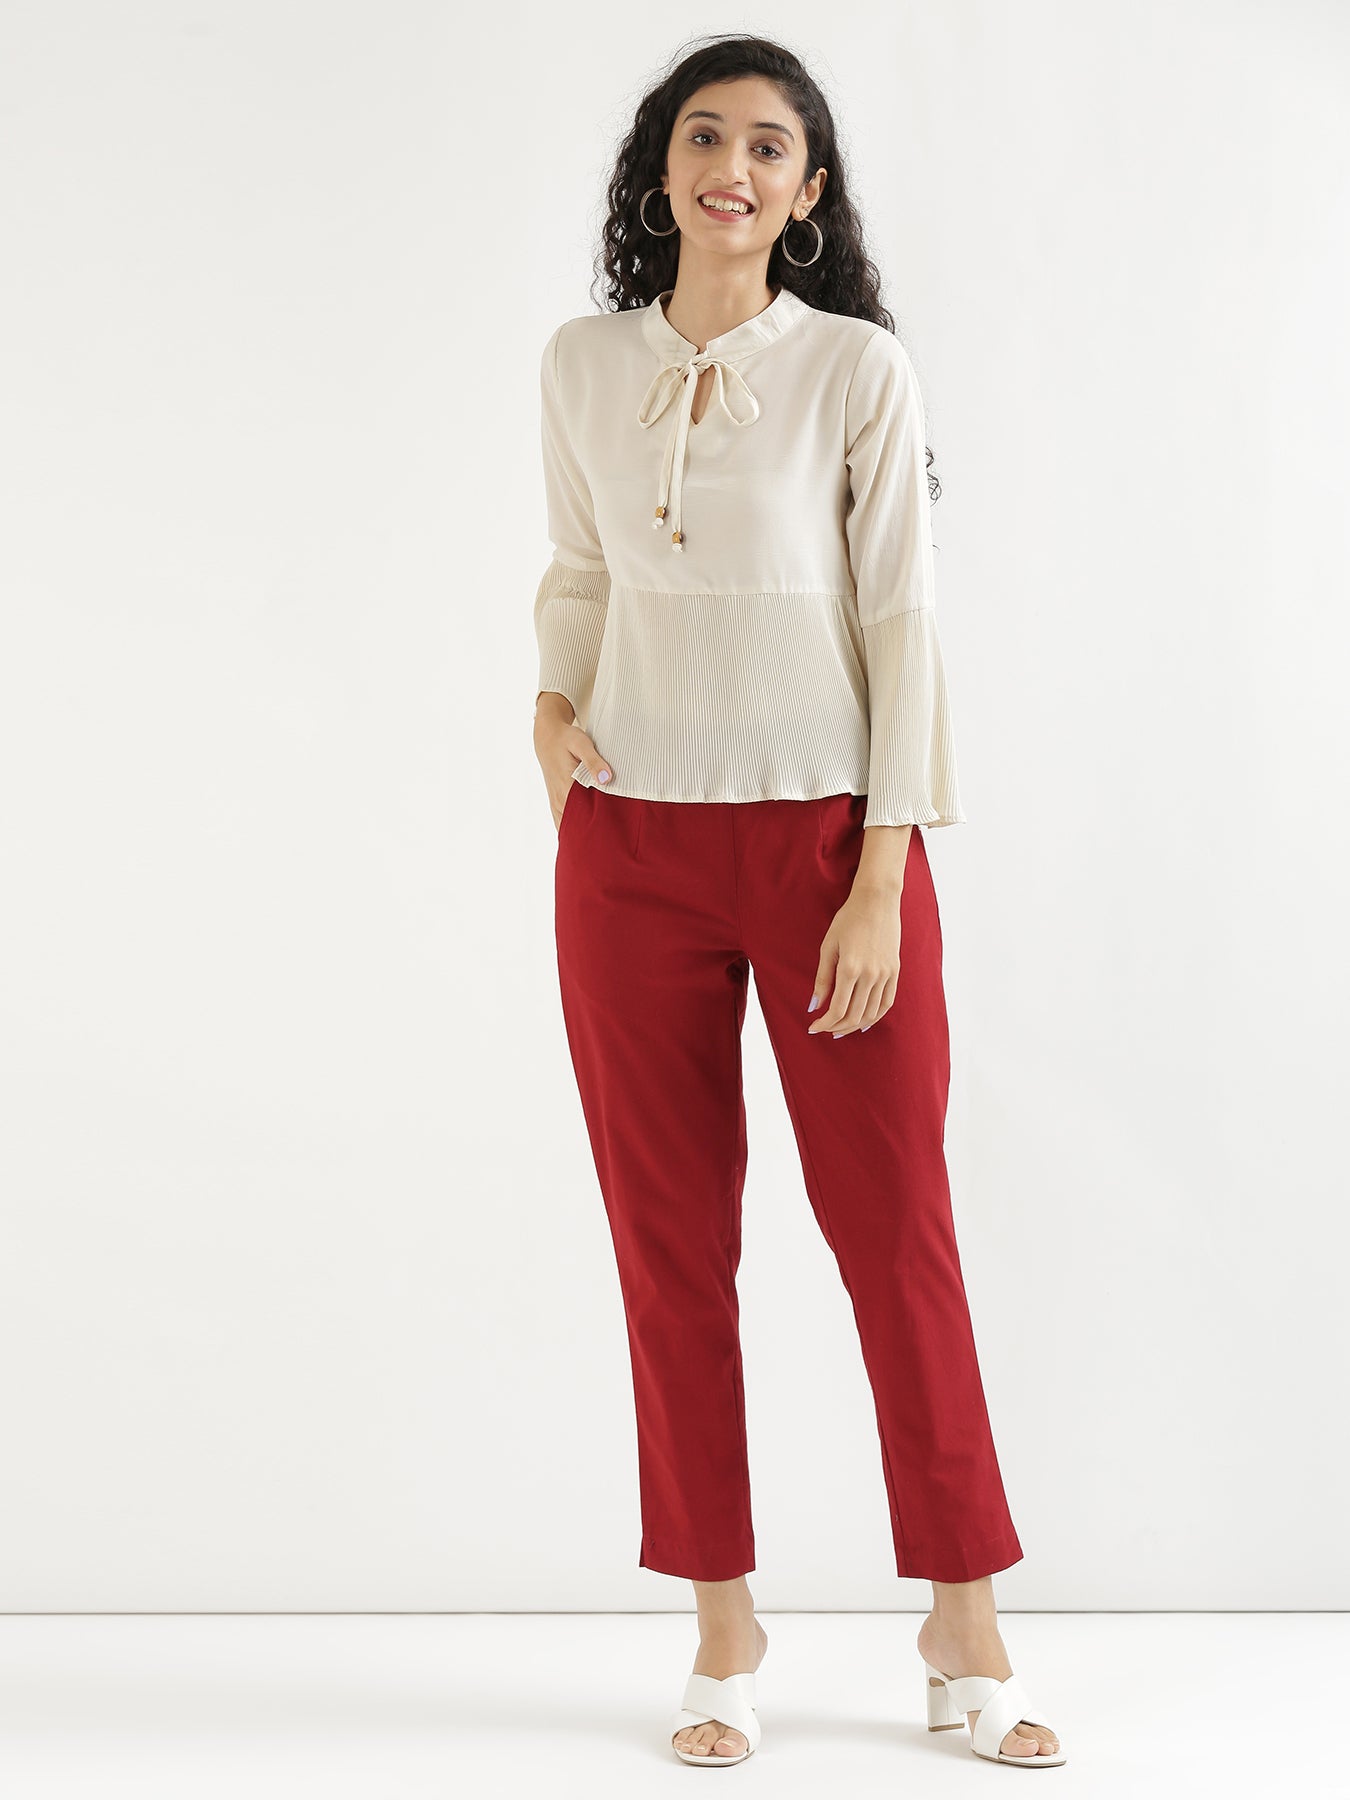 WISHFUL by W Slim Fit Women Red Trousers - Buy WISHFUL by W Slim Fit Women  Red Trousers Online at Best Prices in India | Flipkart.com